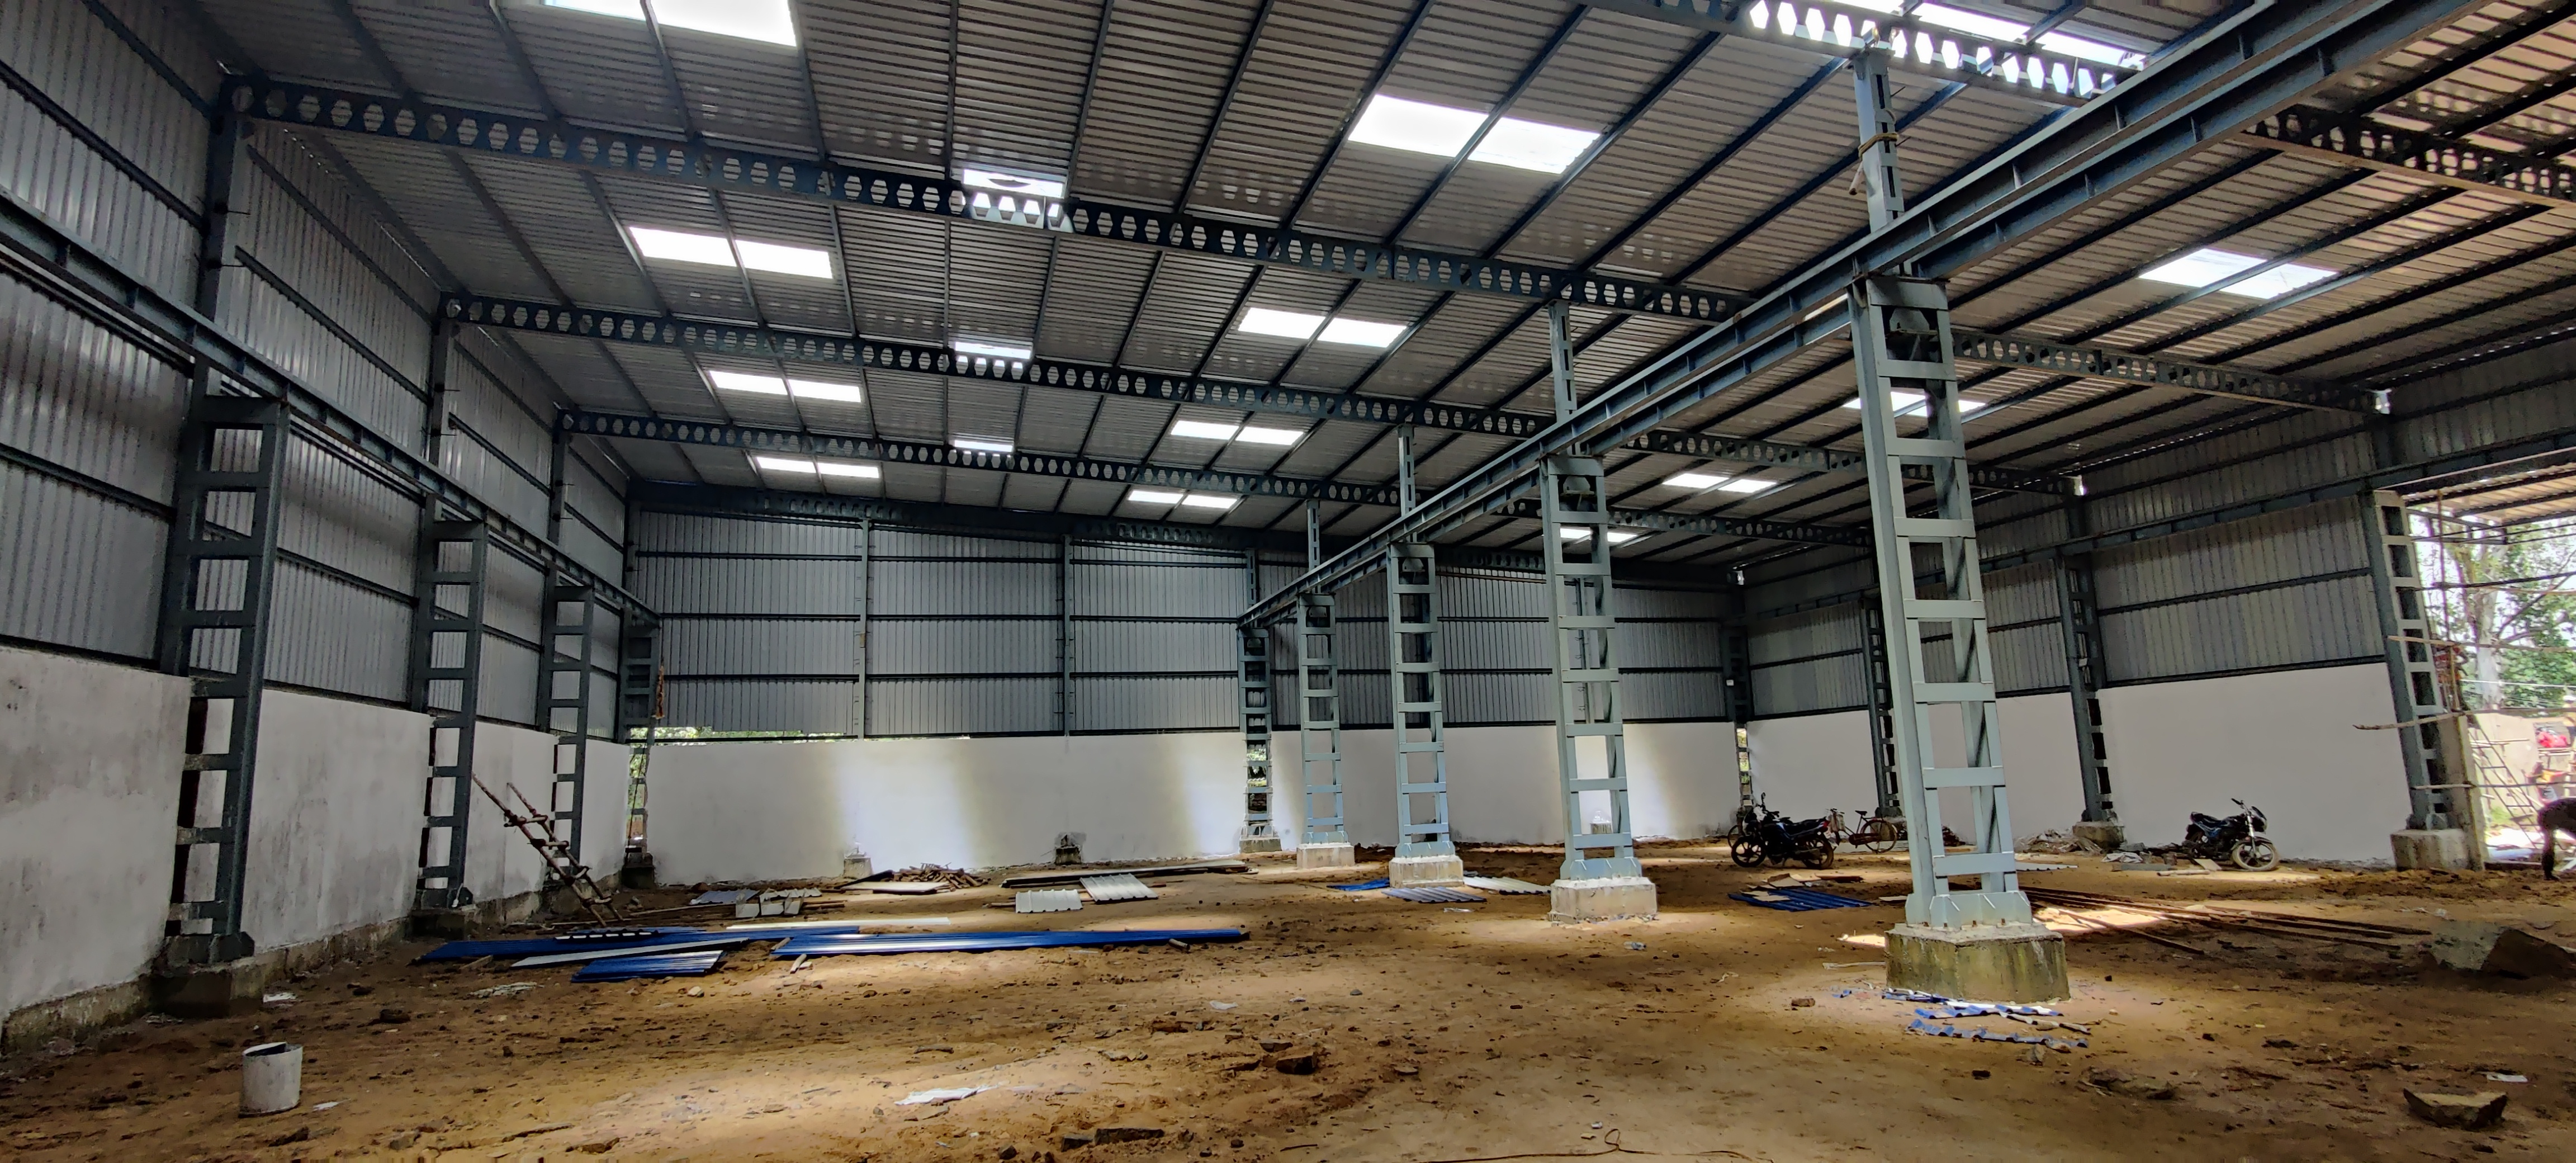 PRE FABRICATED SHED INTERIOR 2